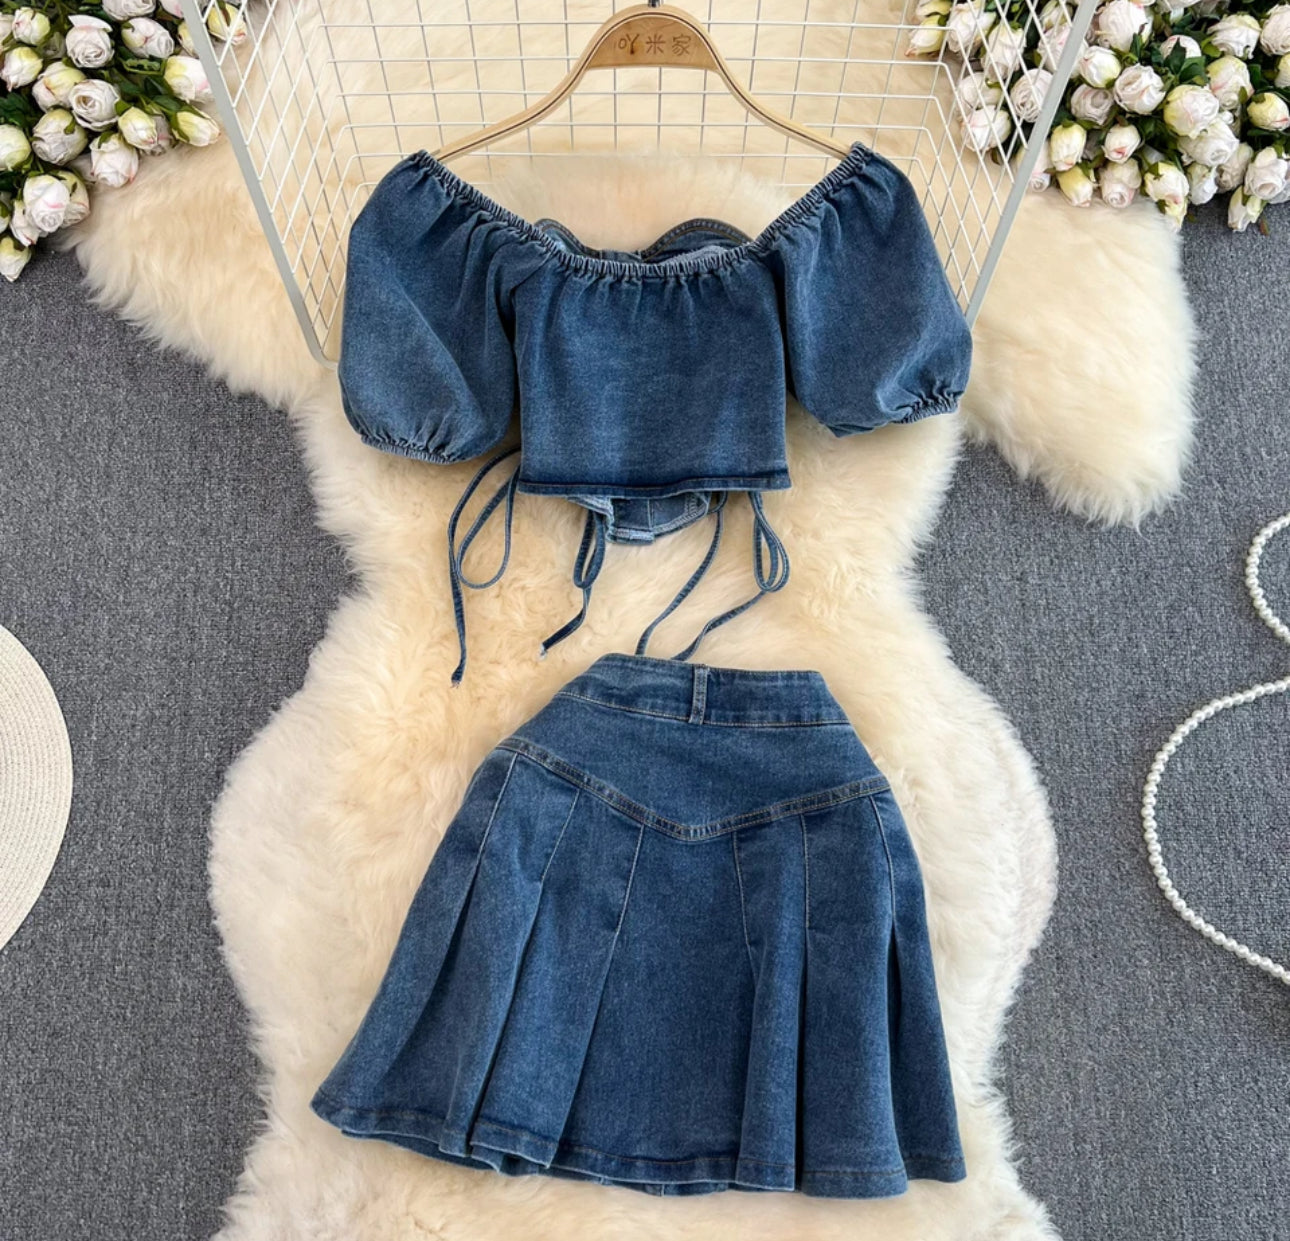 Women's Two Piece Solid Short Sleeve Off Shoulder Frill Trim Party Tie Side Crop Denim Blouse Shirts and Top